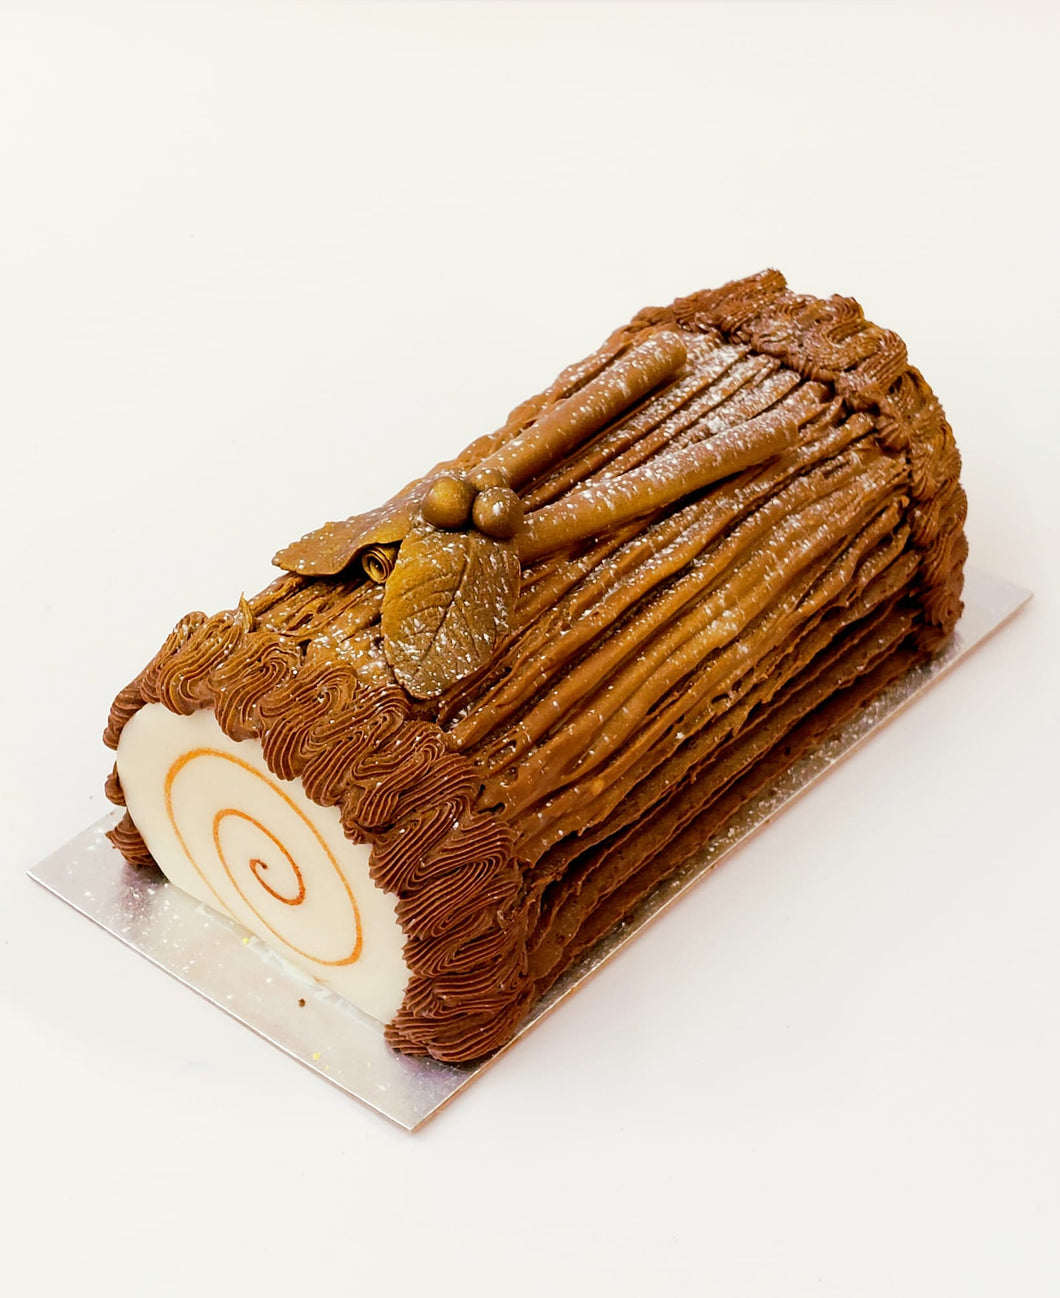 Deluxe Irish Cream Yule Log (Collection only)